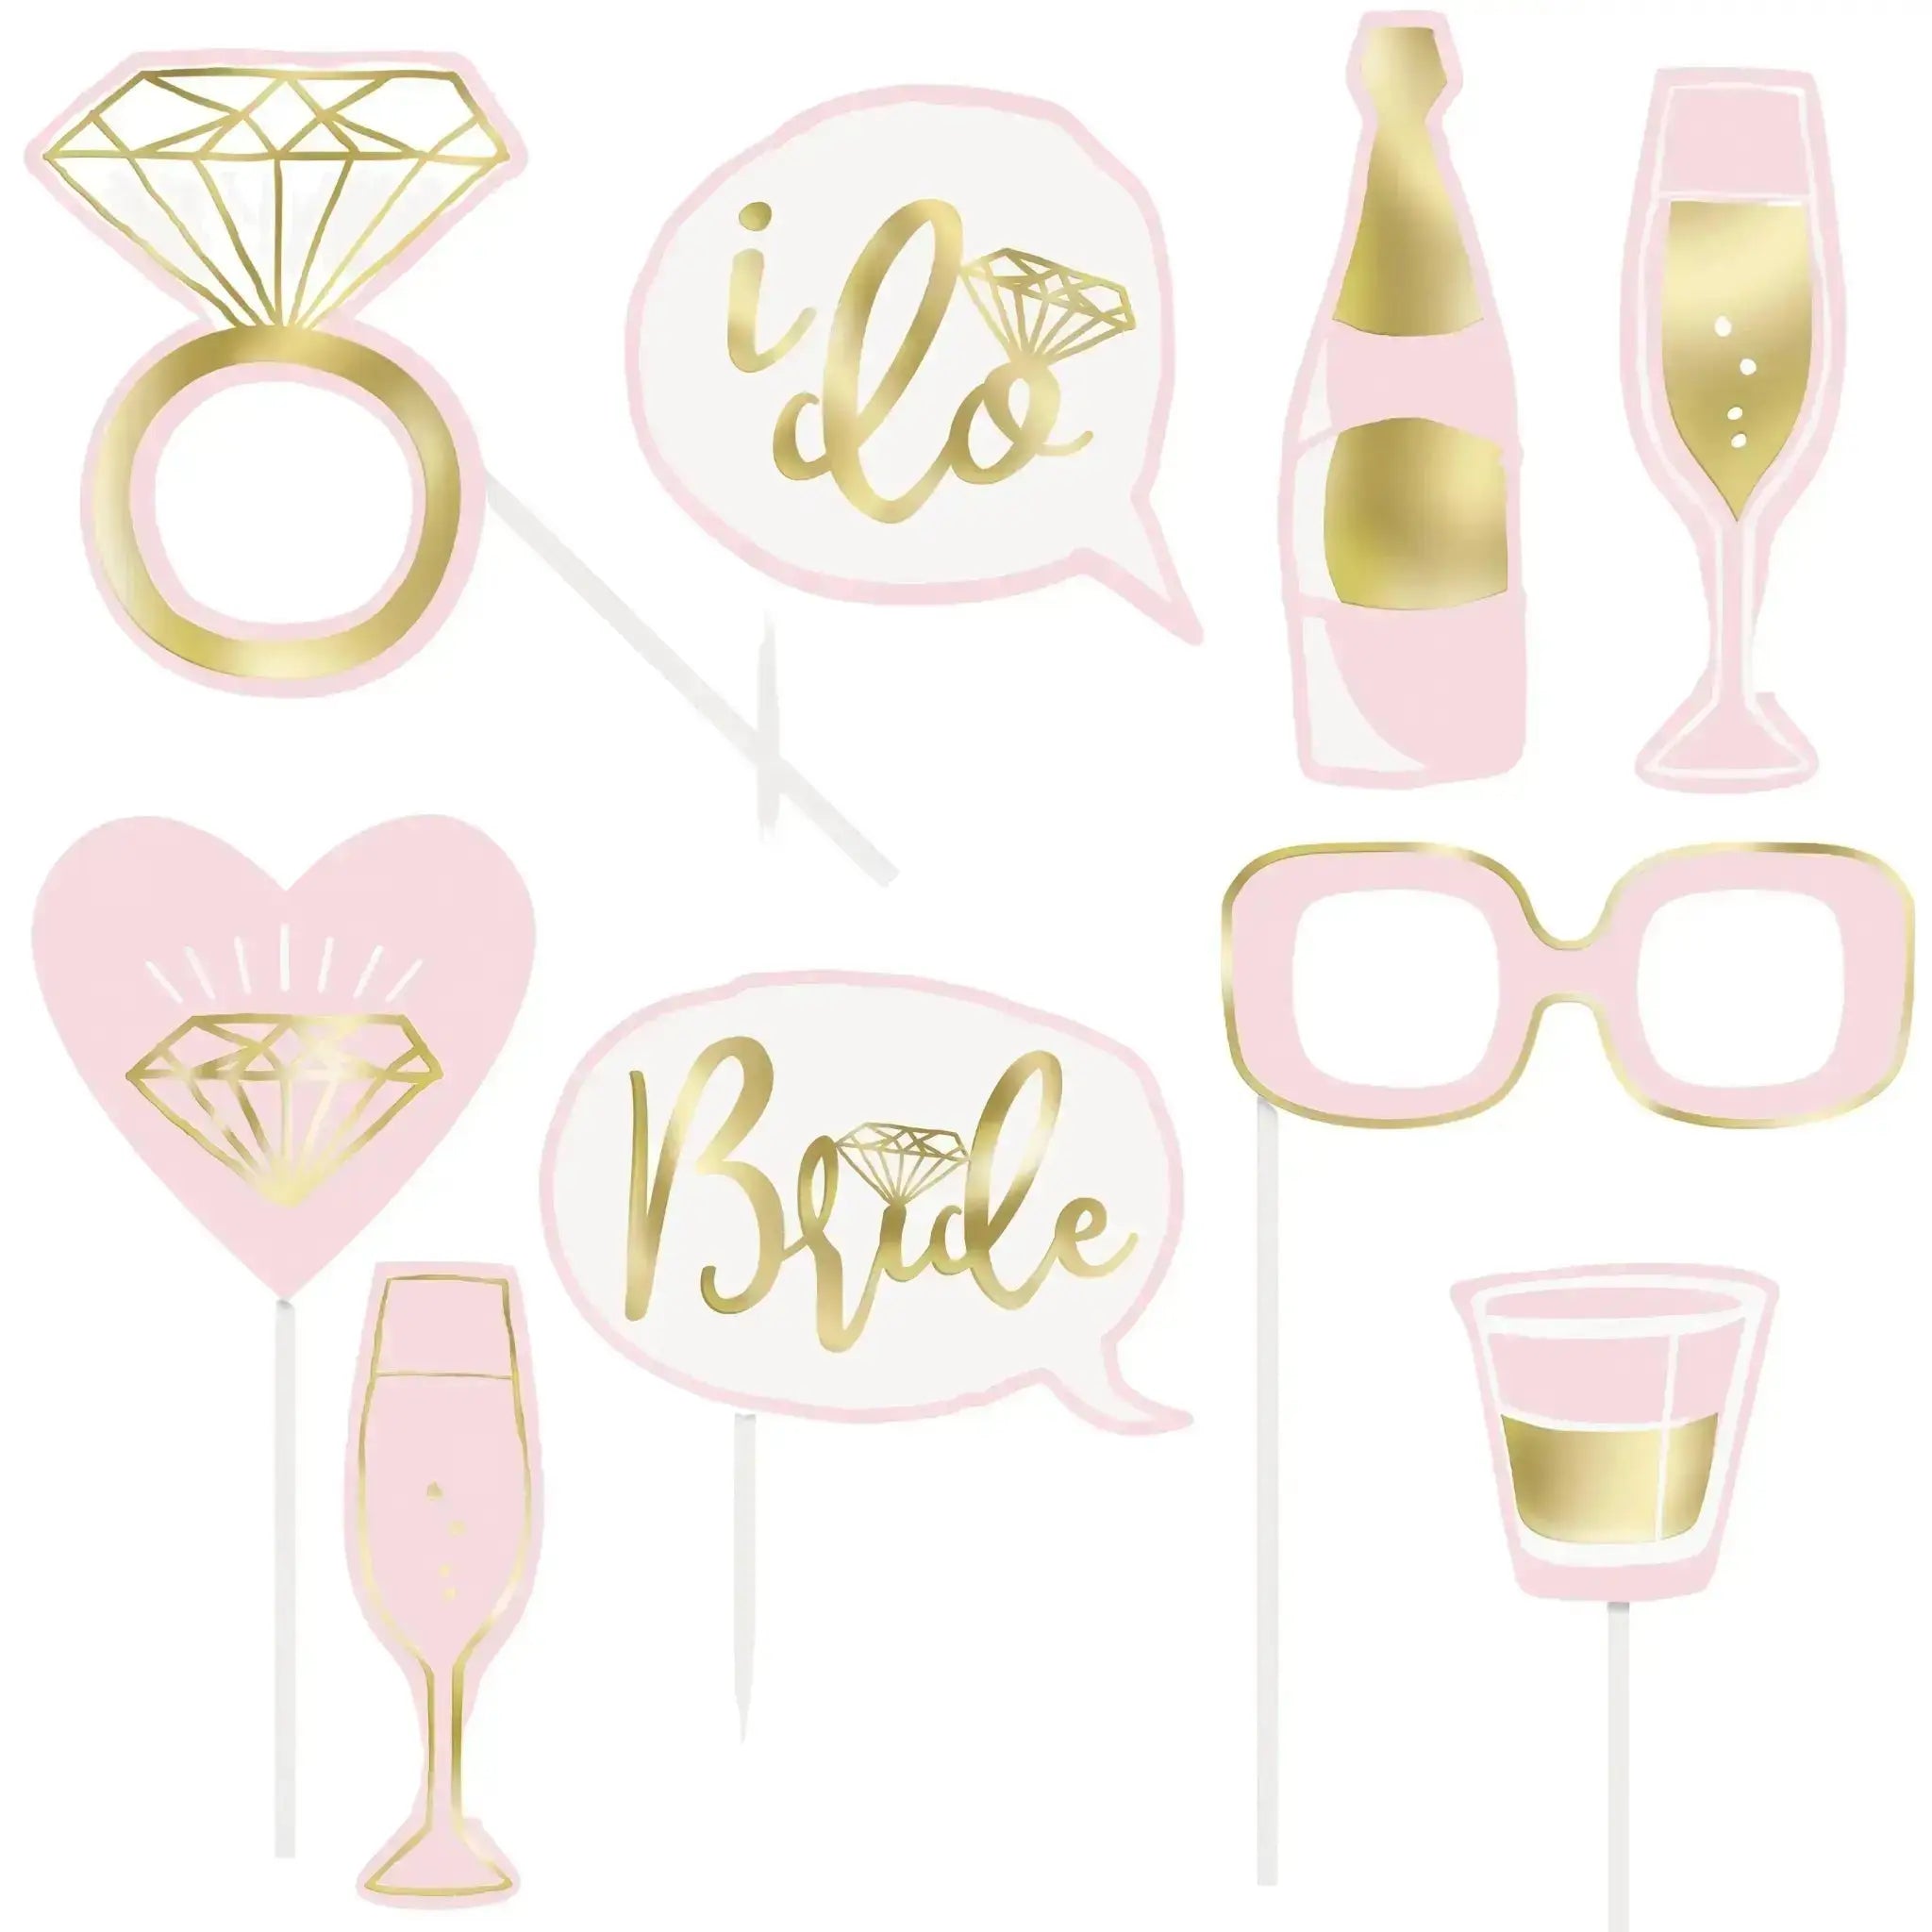 Pink and Gold Foil Bridal Party Photo Booth Props, 10ct | The Party Hut